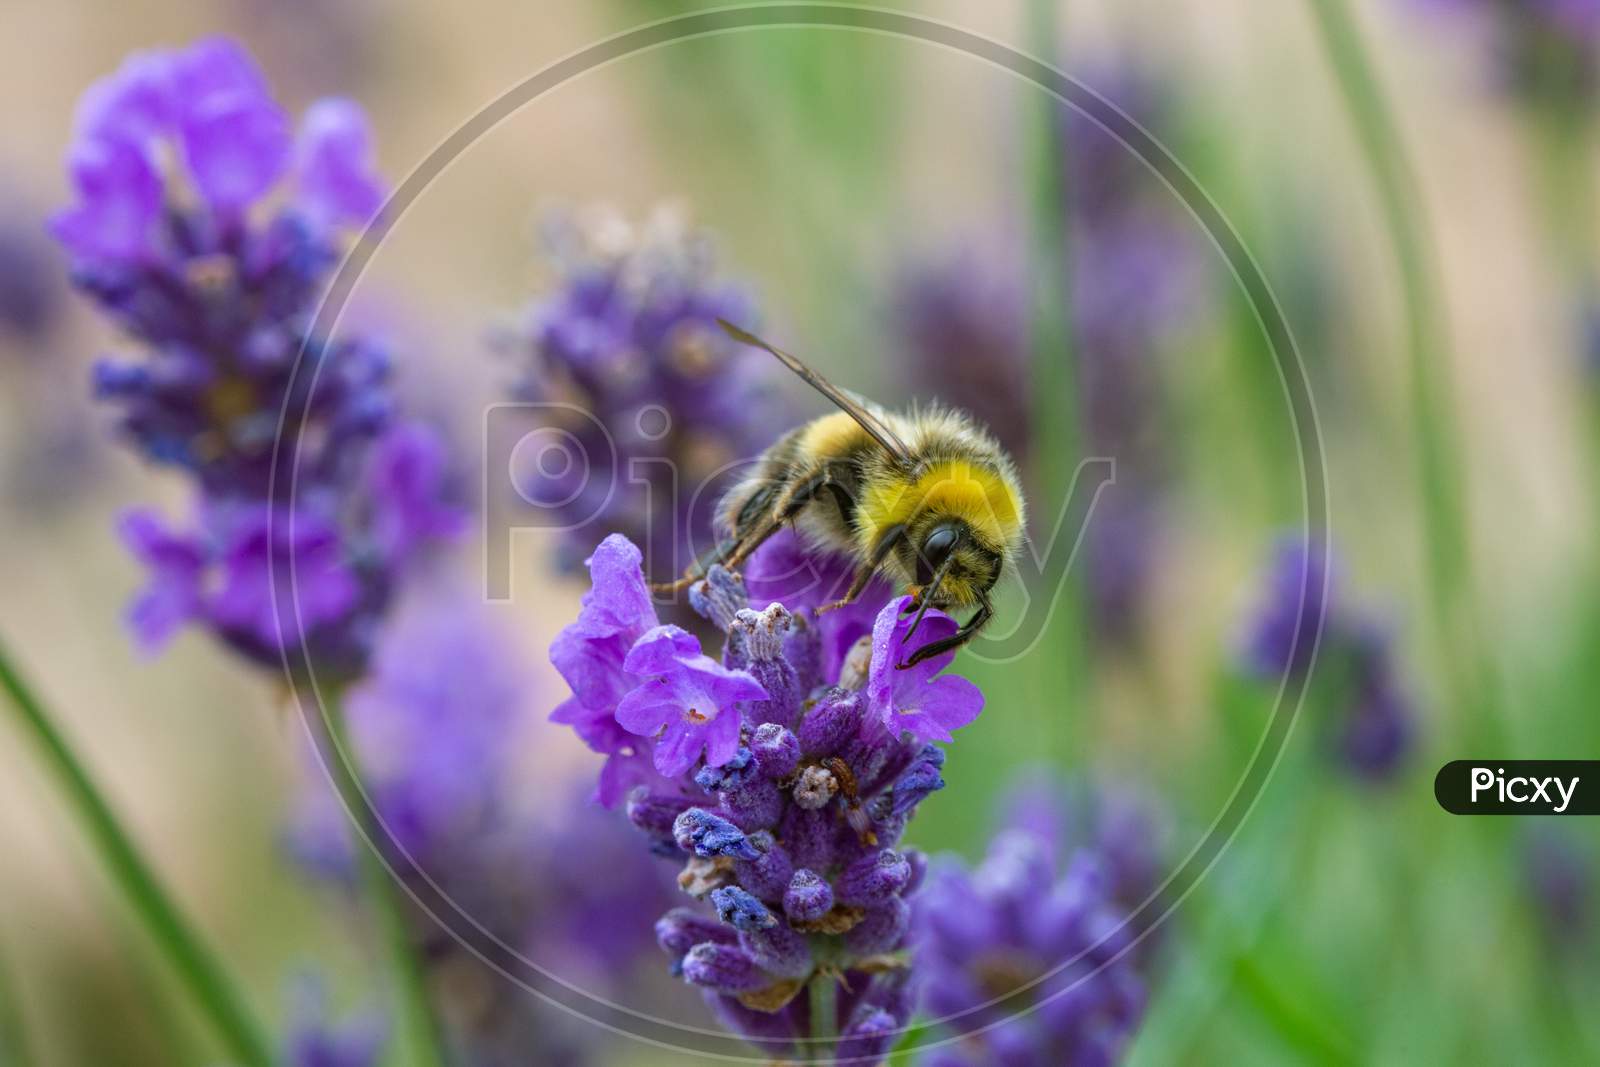 Honey Bee Taking Pollen From A Lavender Plant In An English Garden